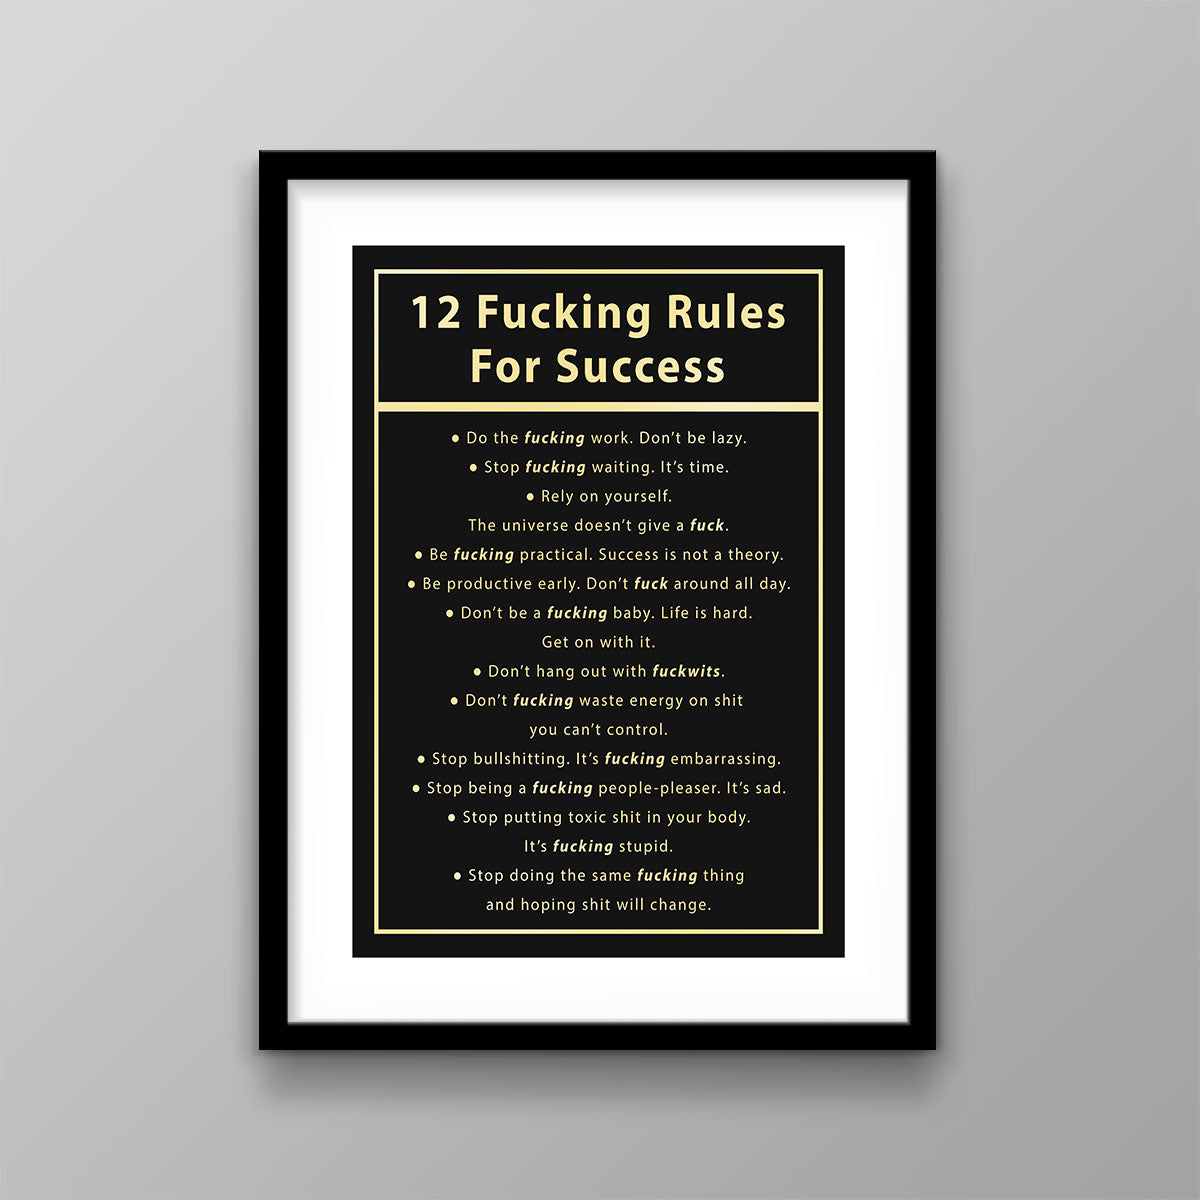 12 Fucking Rules For Success - Success Hunters Prints